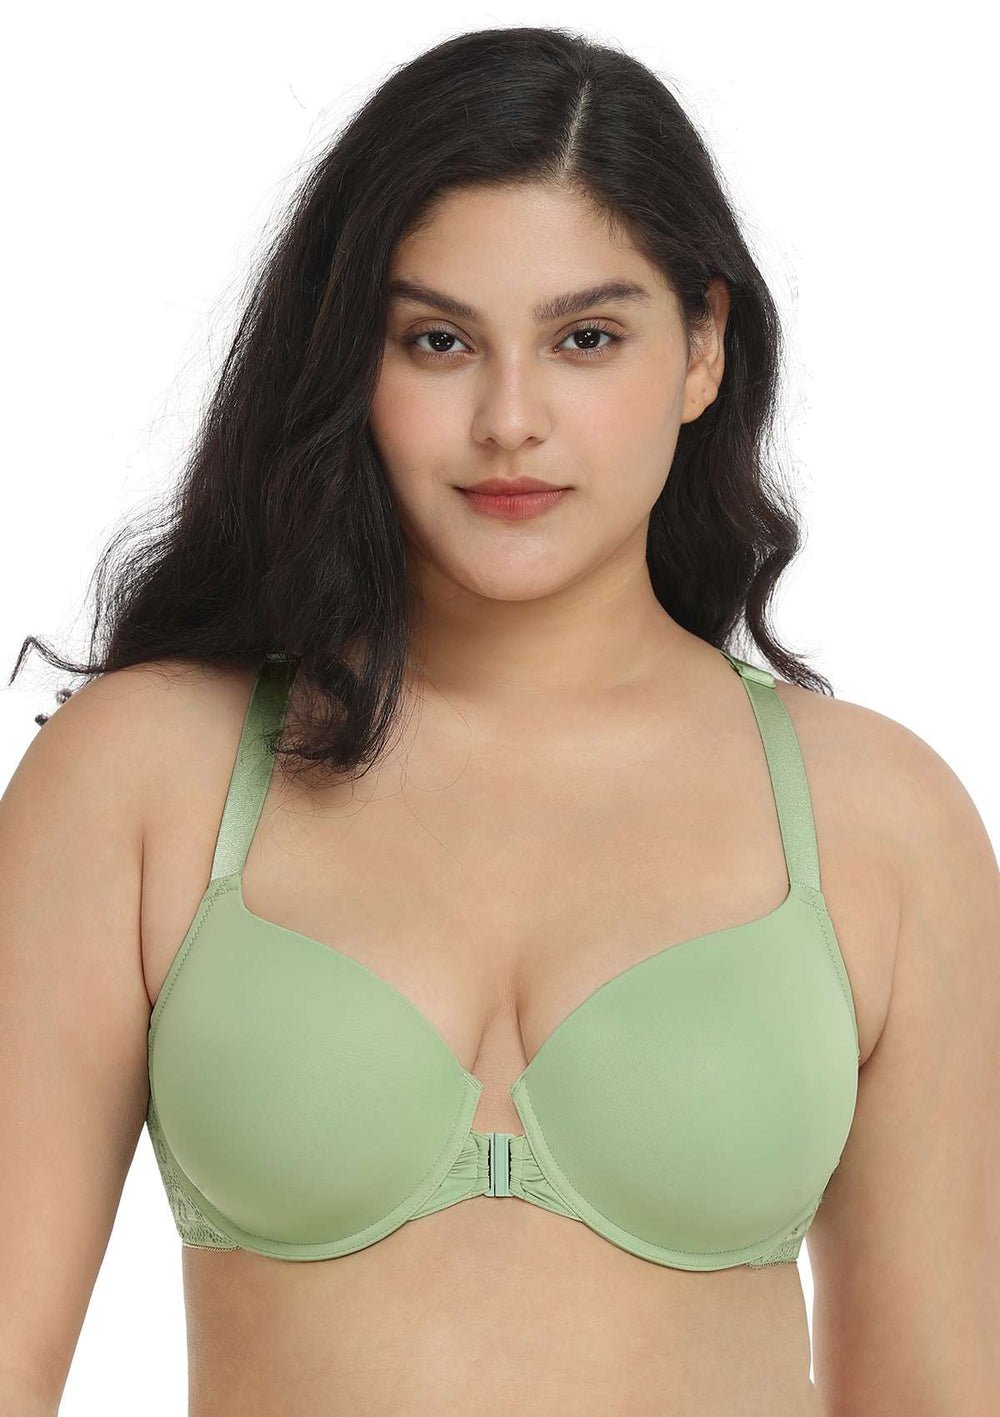 HSIA Bras Sale: Best Lifting Bra for Sagging Breasts